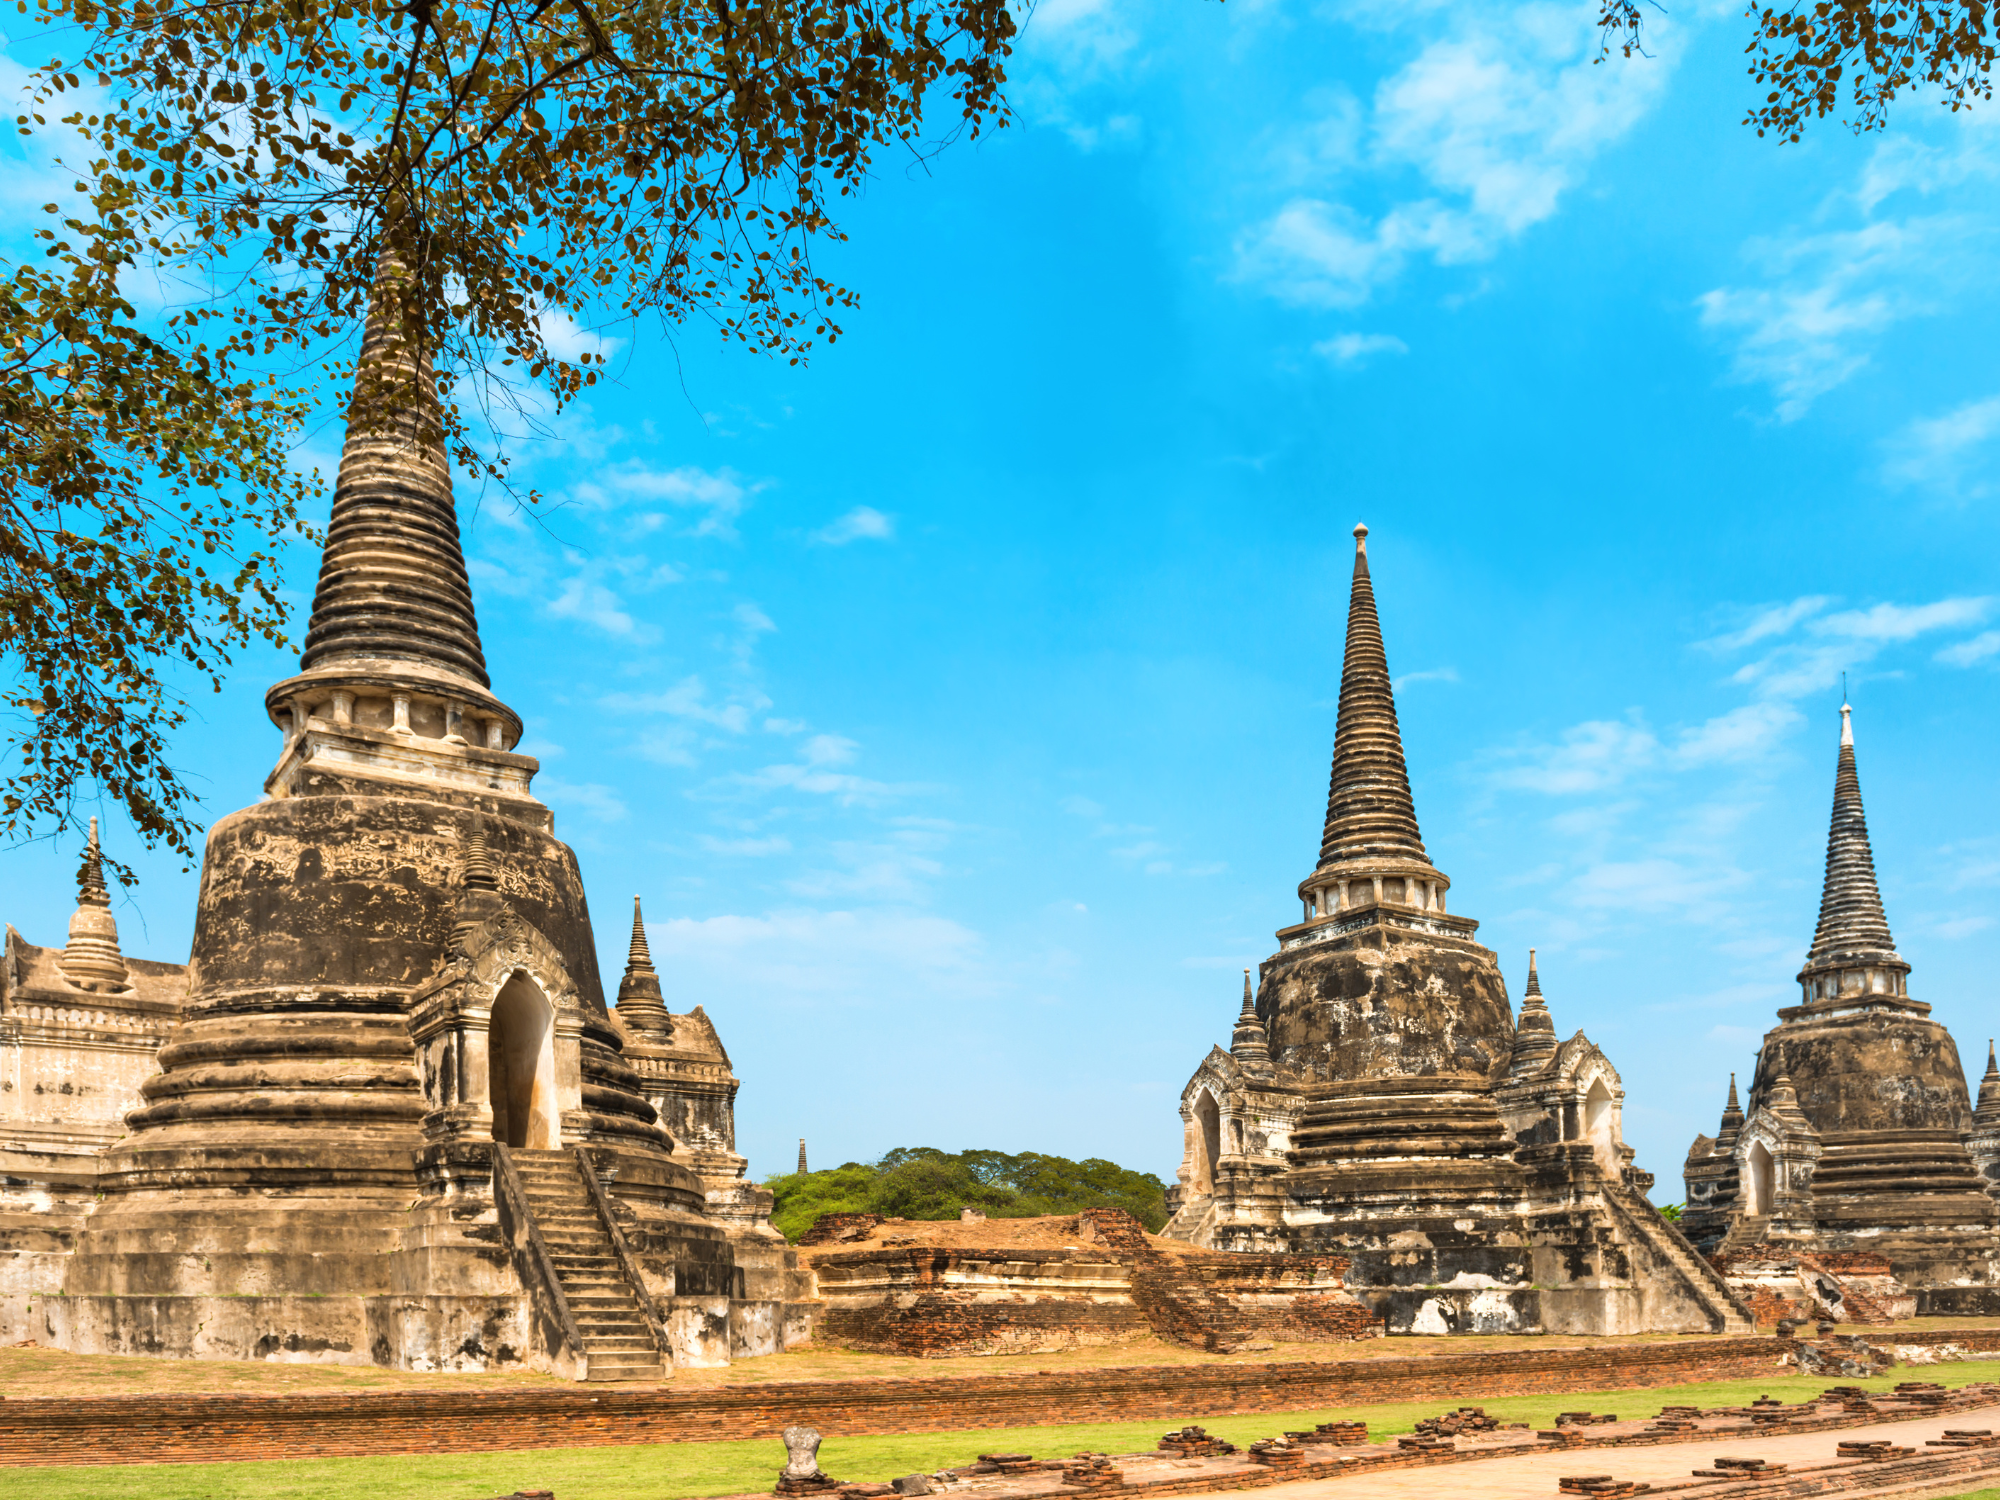 Things to do during your trip to thailand from uae - Explore the ruins of Ayutthaya